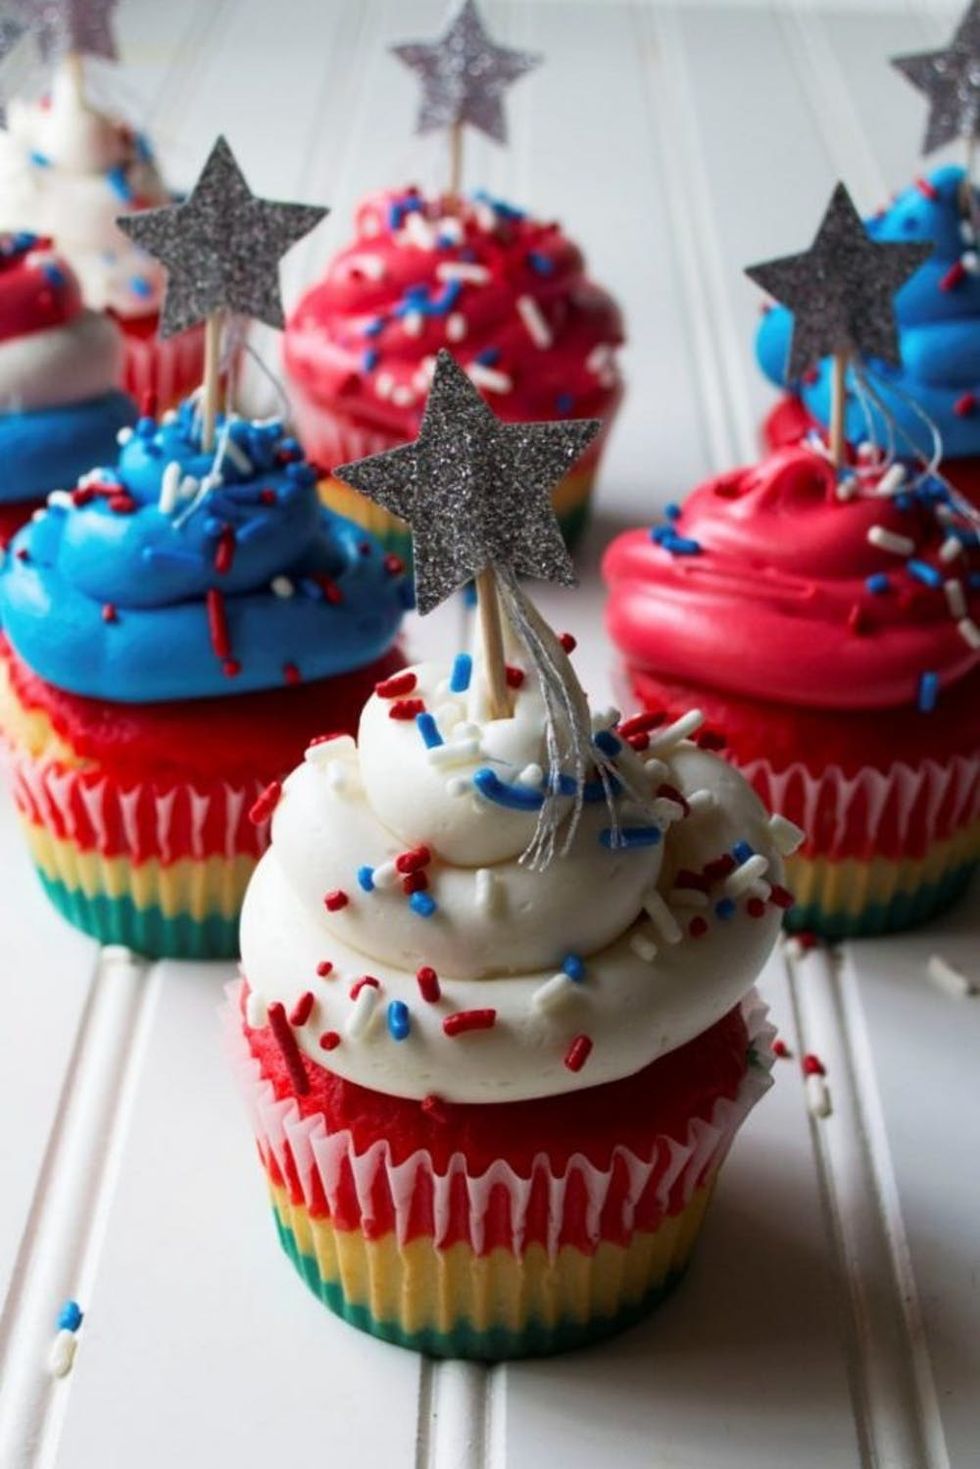 15 Spangled 4th of July Cupcake and Cake Recipes - Brit + Co